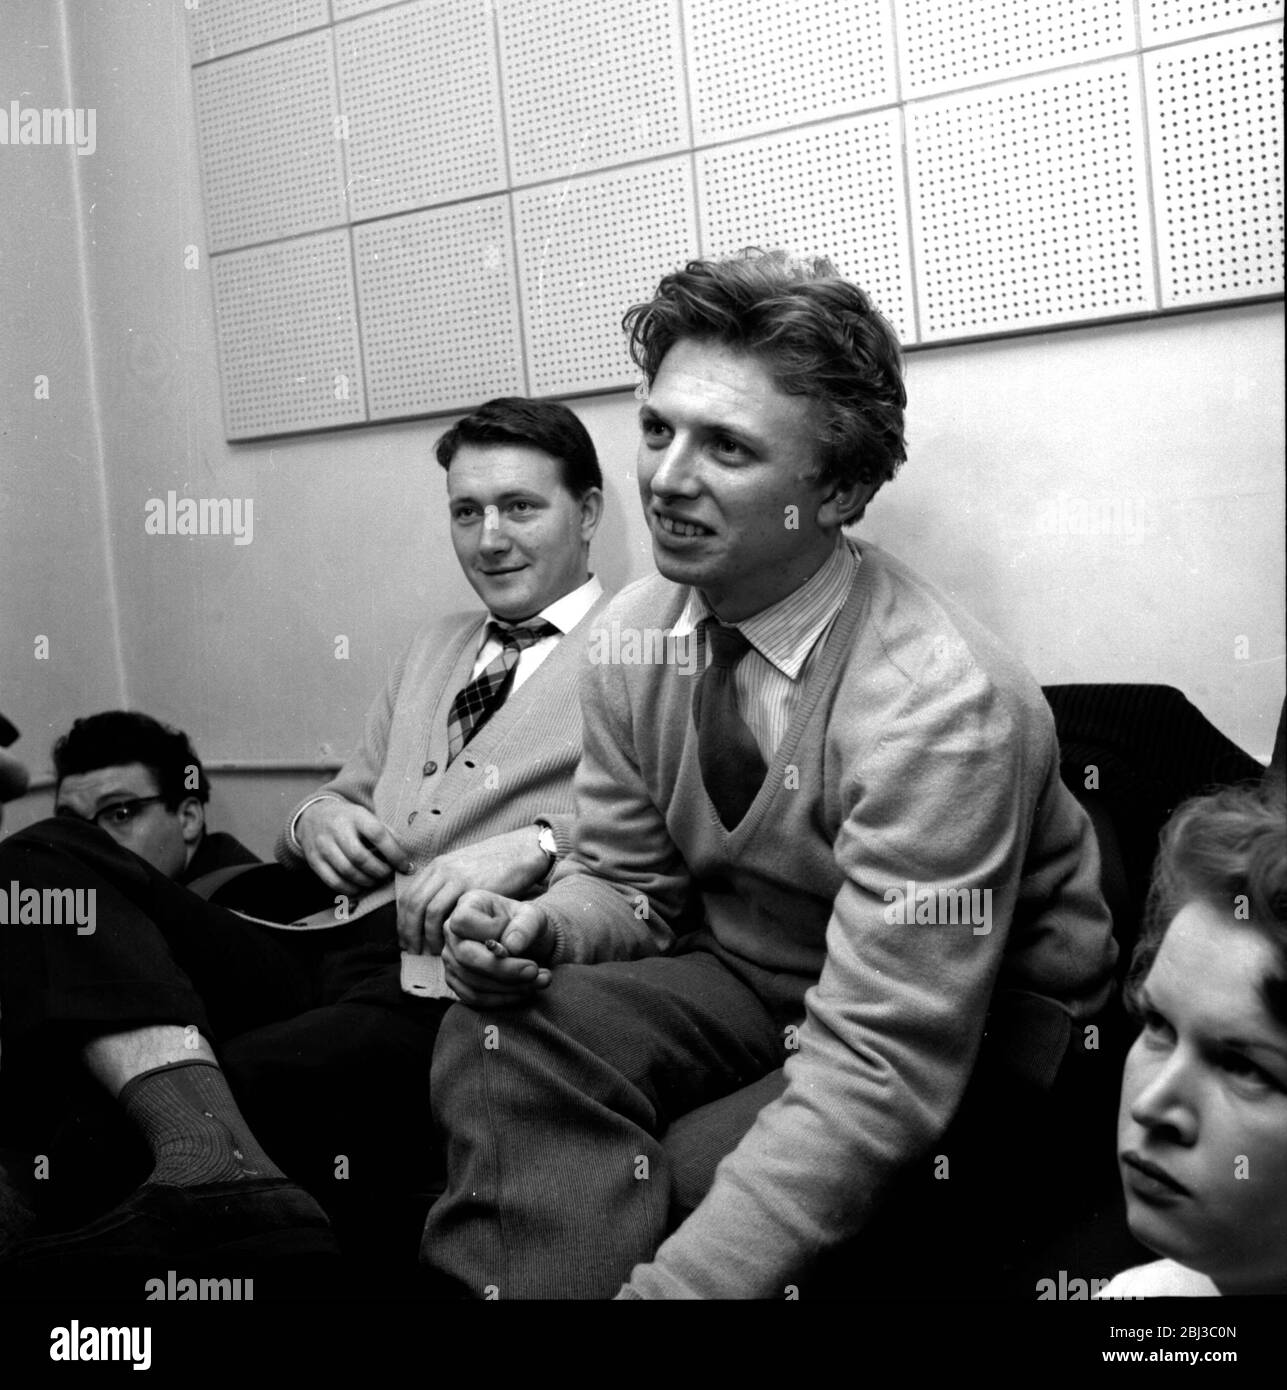 Tommy Stele sits in a recording studio next to John Kennedy who discovered him. Taken in the 1950s. Stock Photo